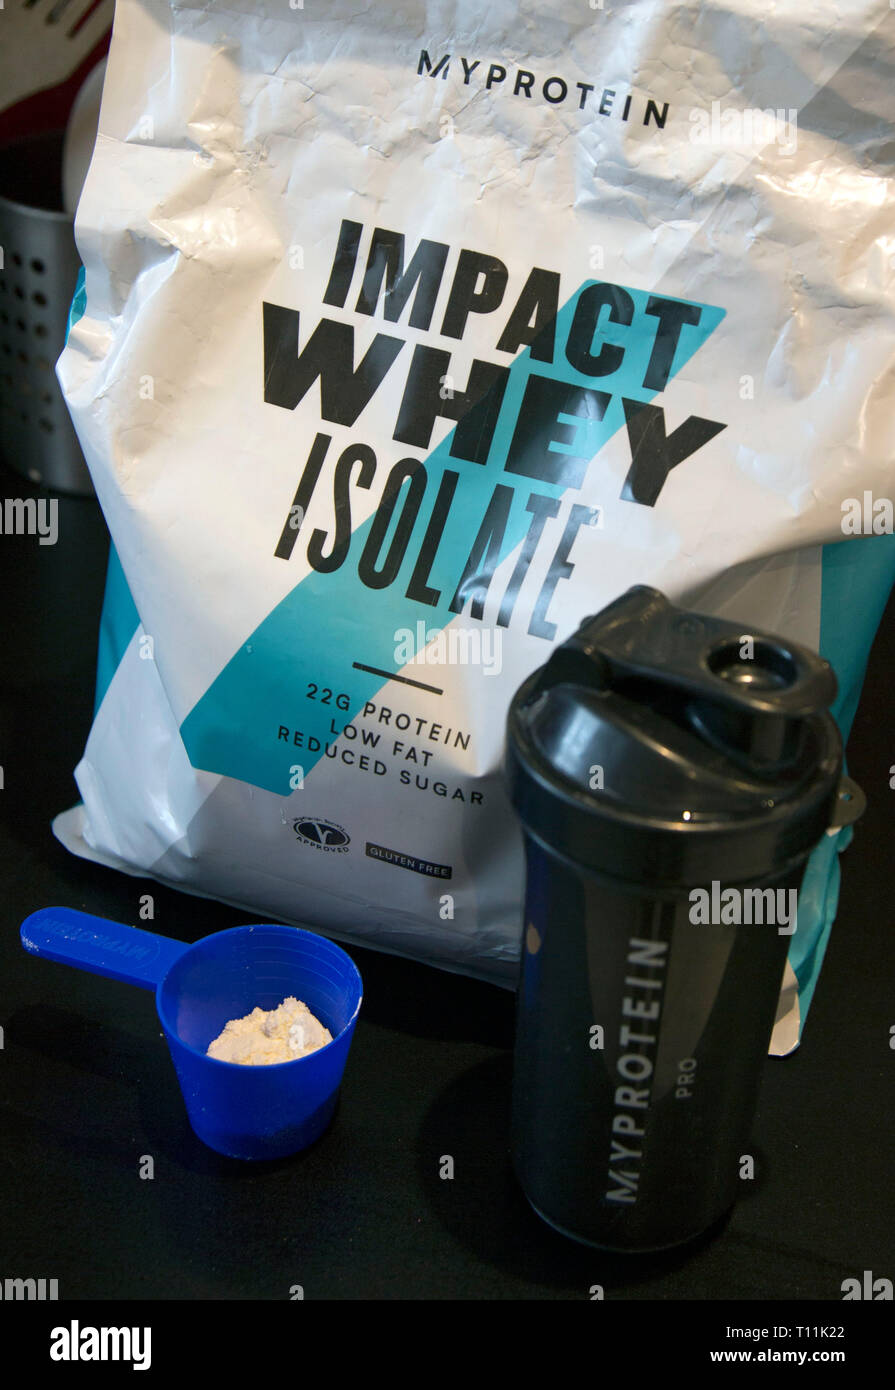 My Protein Impact Whey Isolate sports supplement Stock Photo